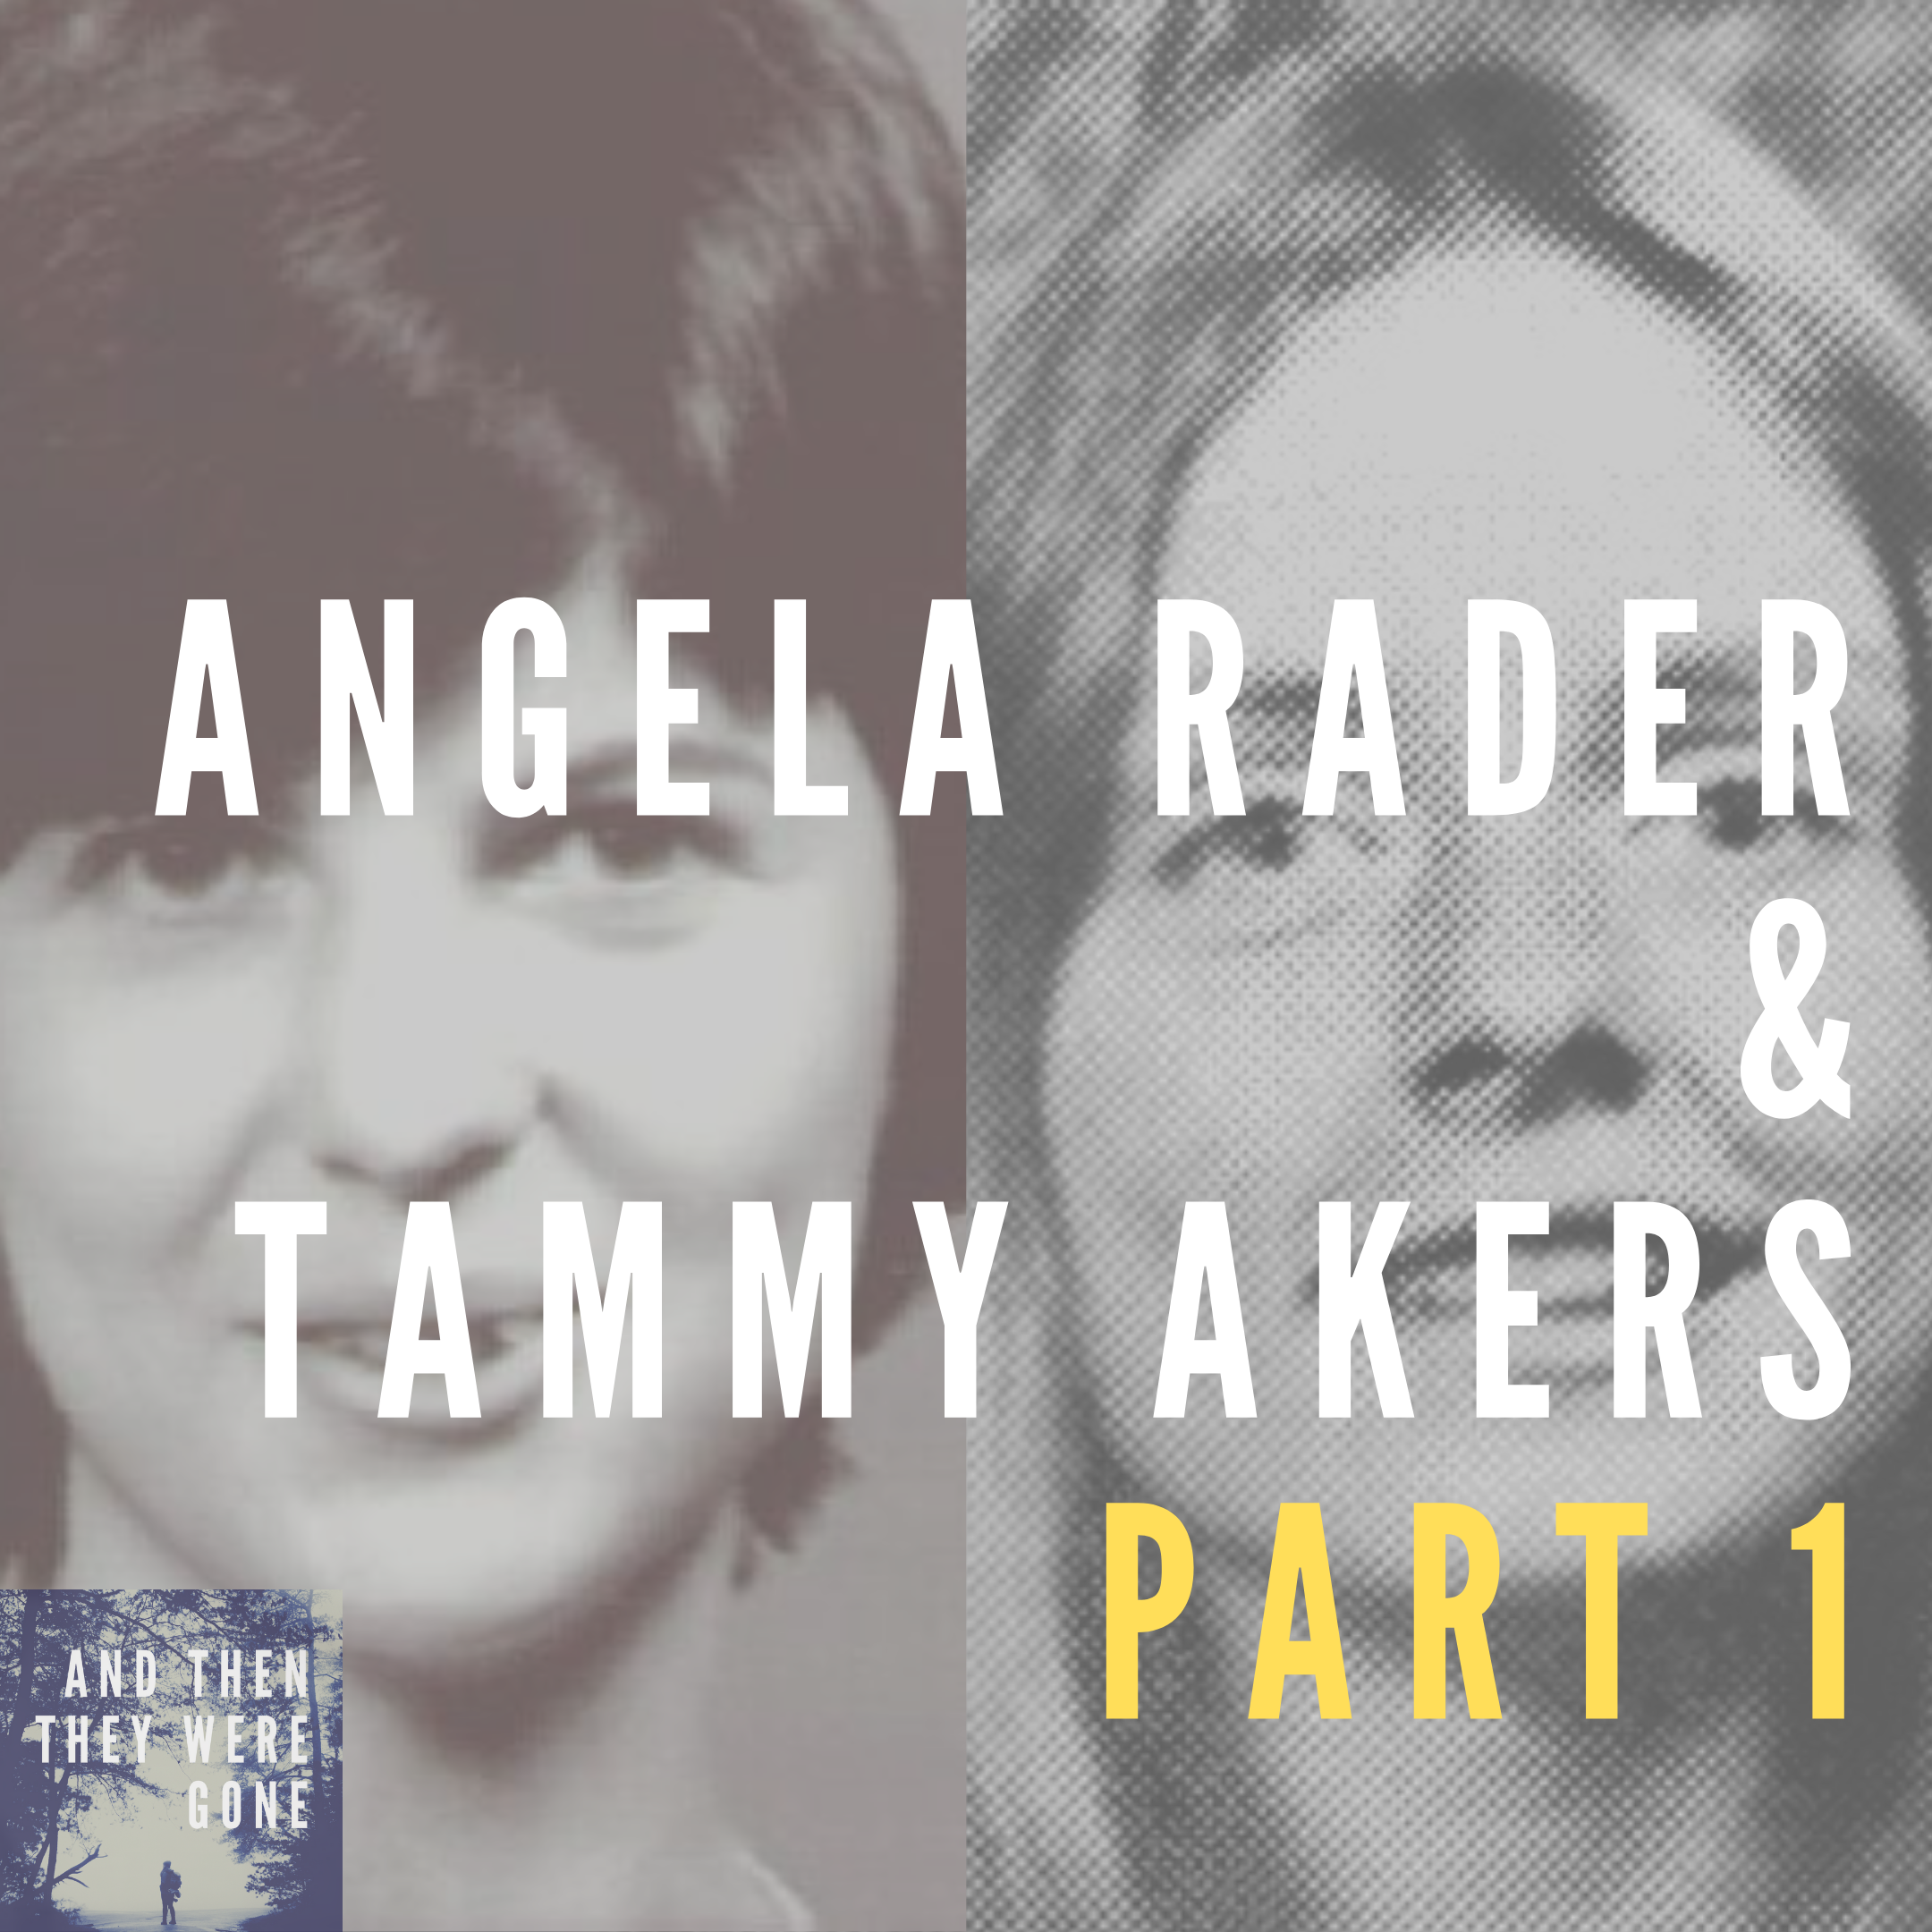 Angela Rader &amp; Tammy Akers Missing since February 7, 1977